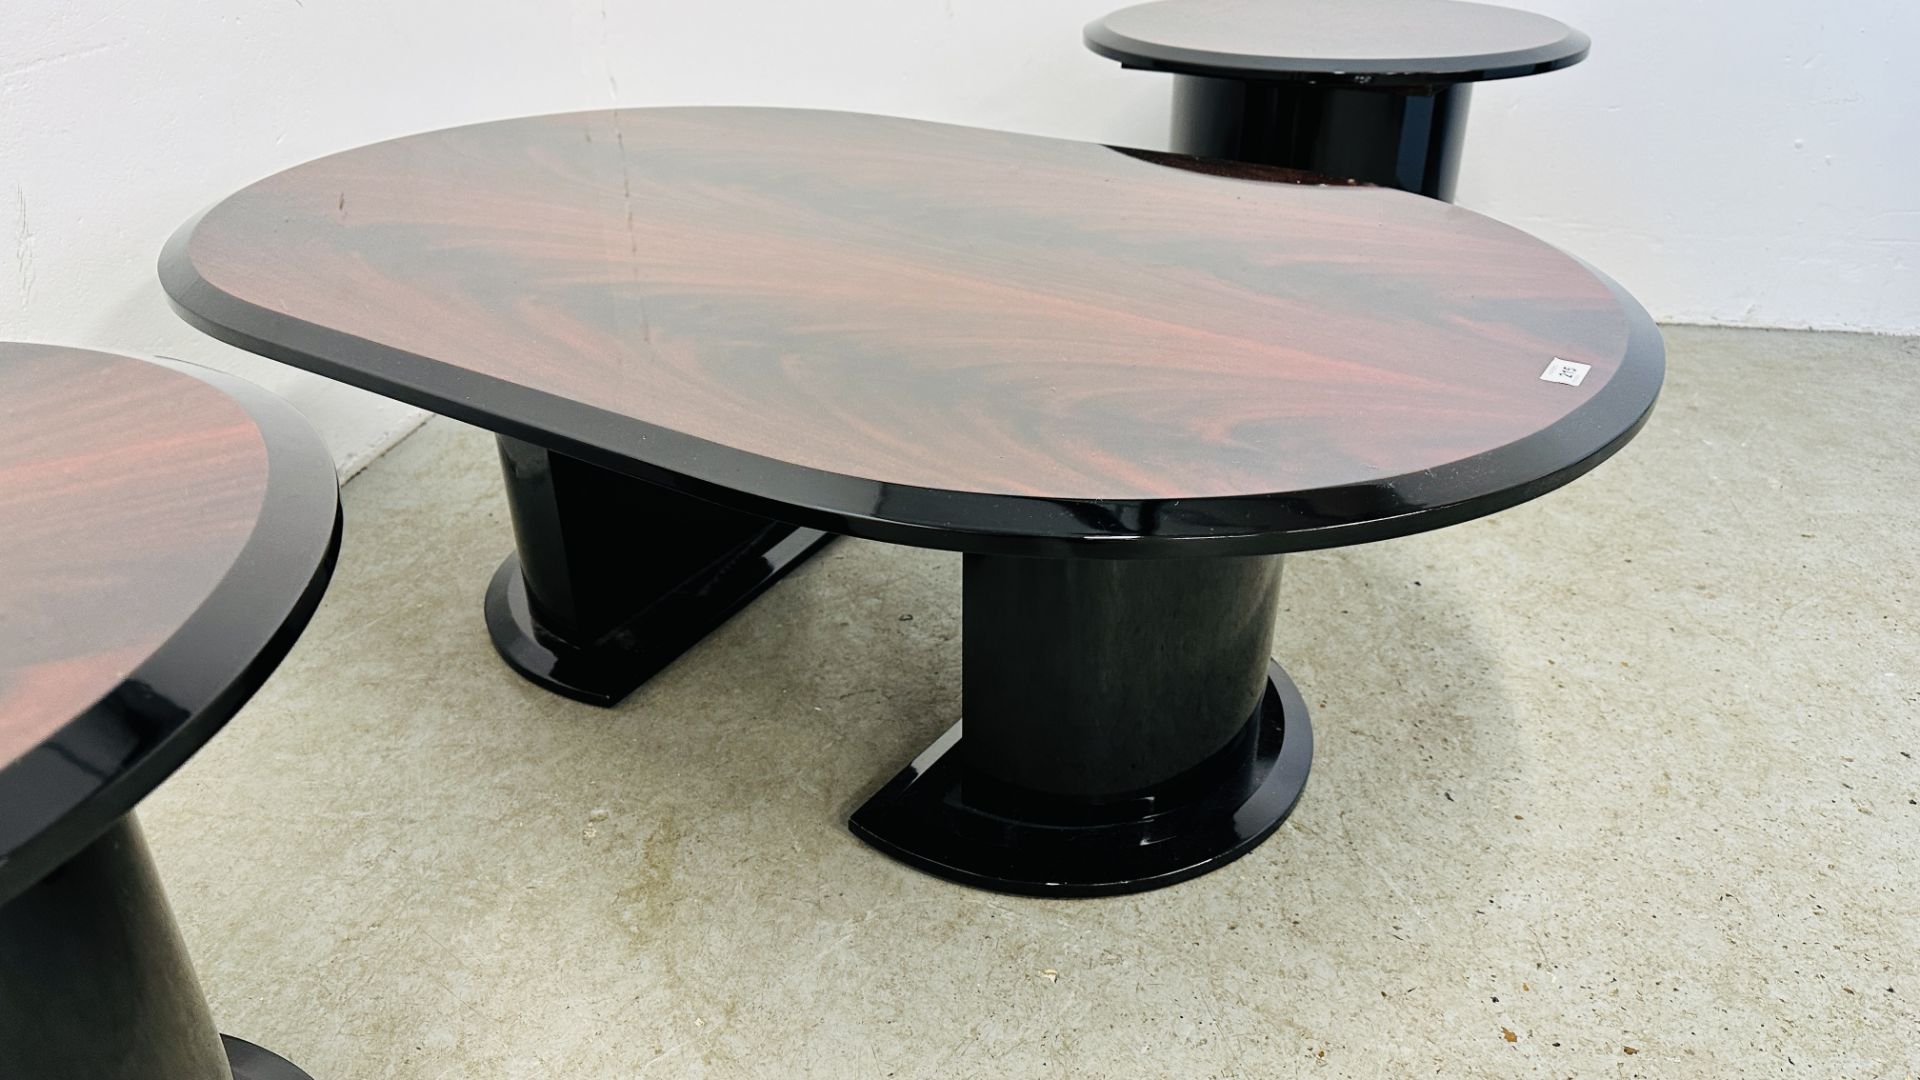 3 MATCHING DESIGN HIGH GLOSS MAHOGANY FINISH COFFEE TABLES INCLUDING A PAIR OF CIRCULAR AND 1 OVAL. - Image 6 of 16